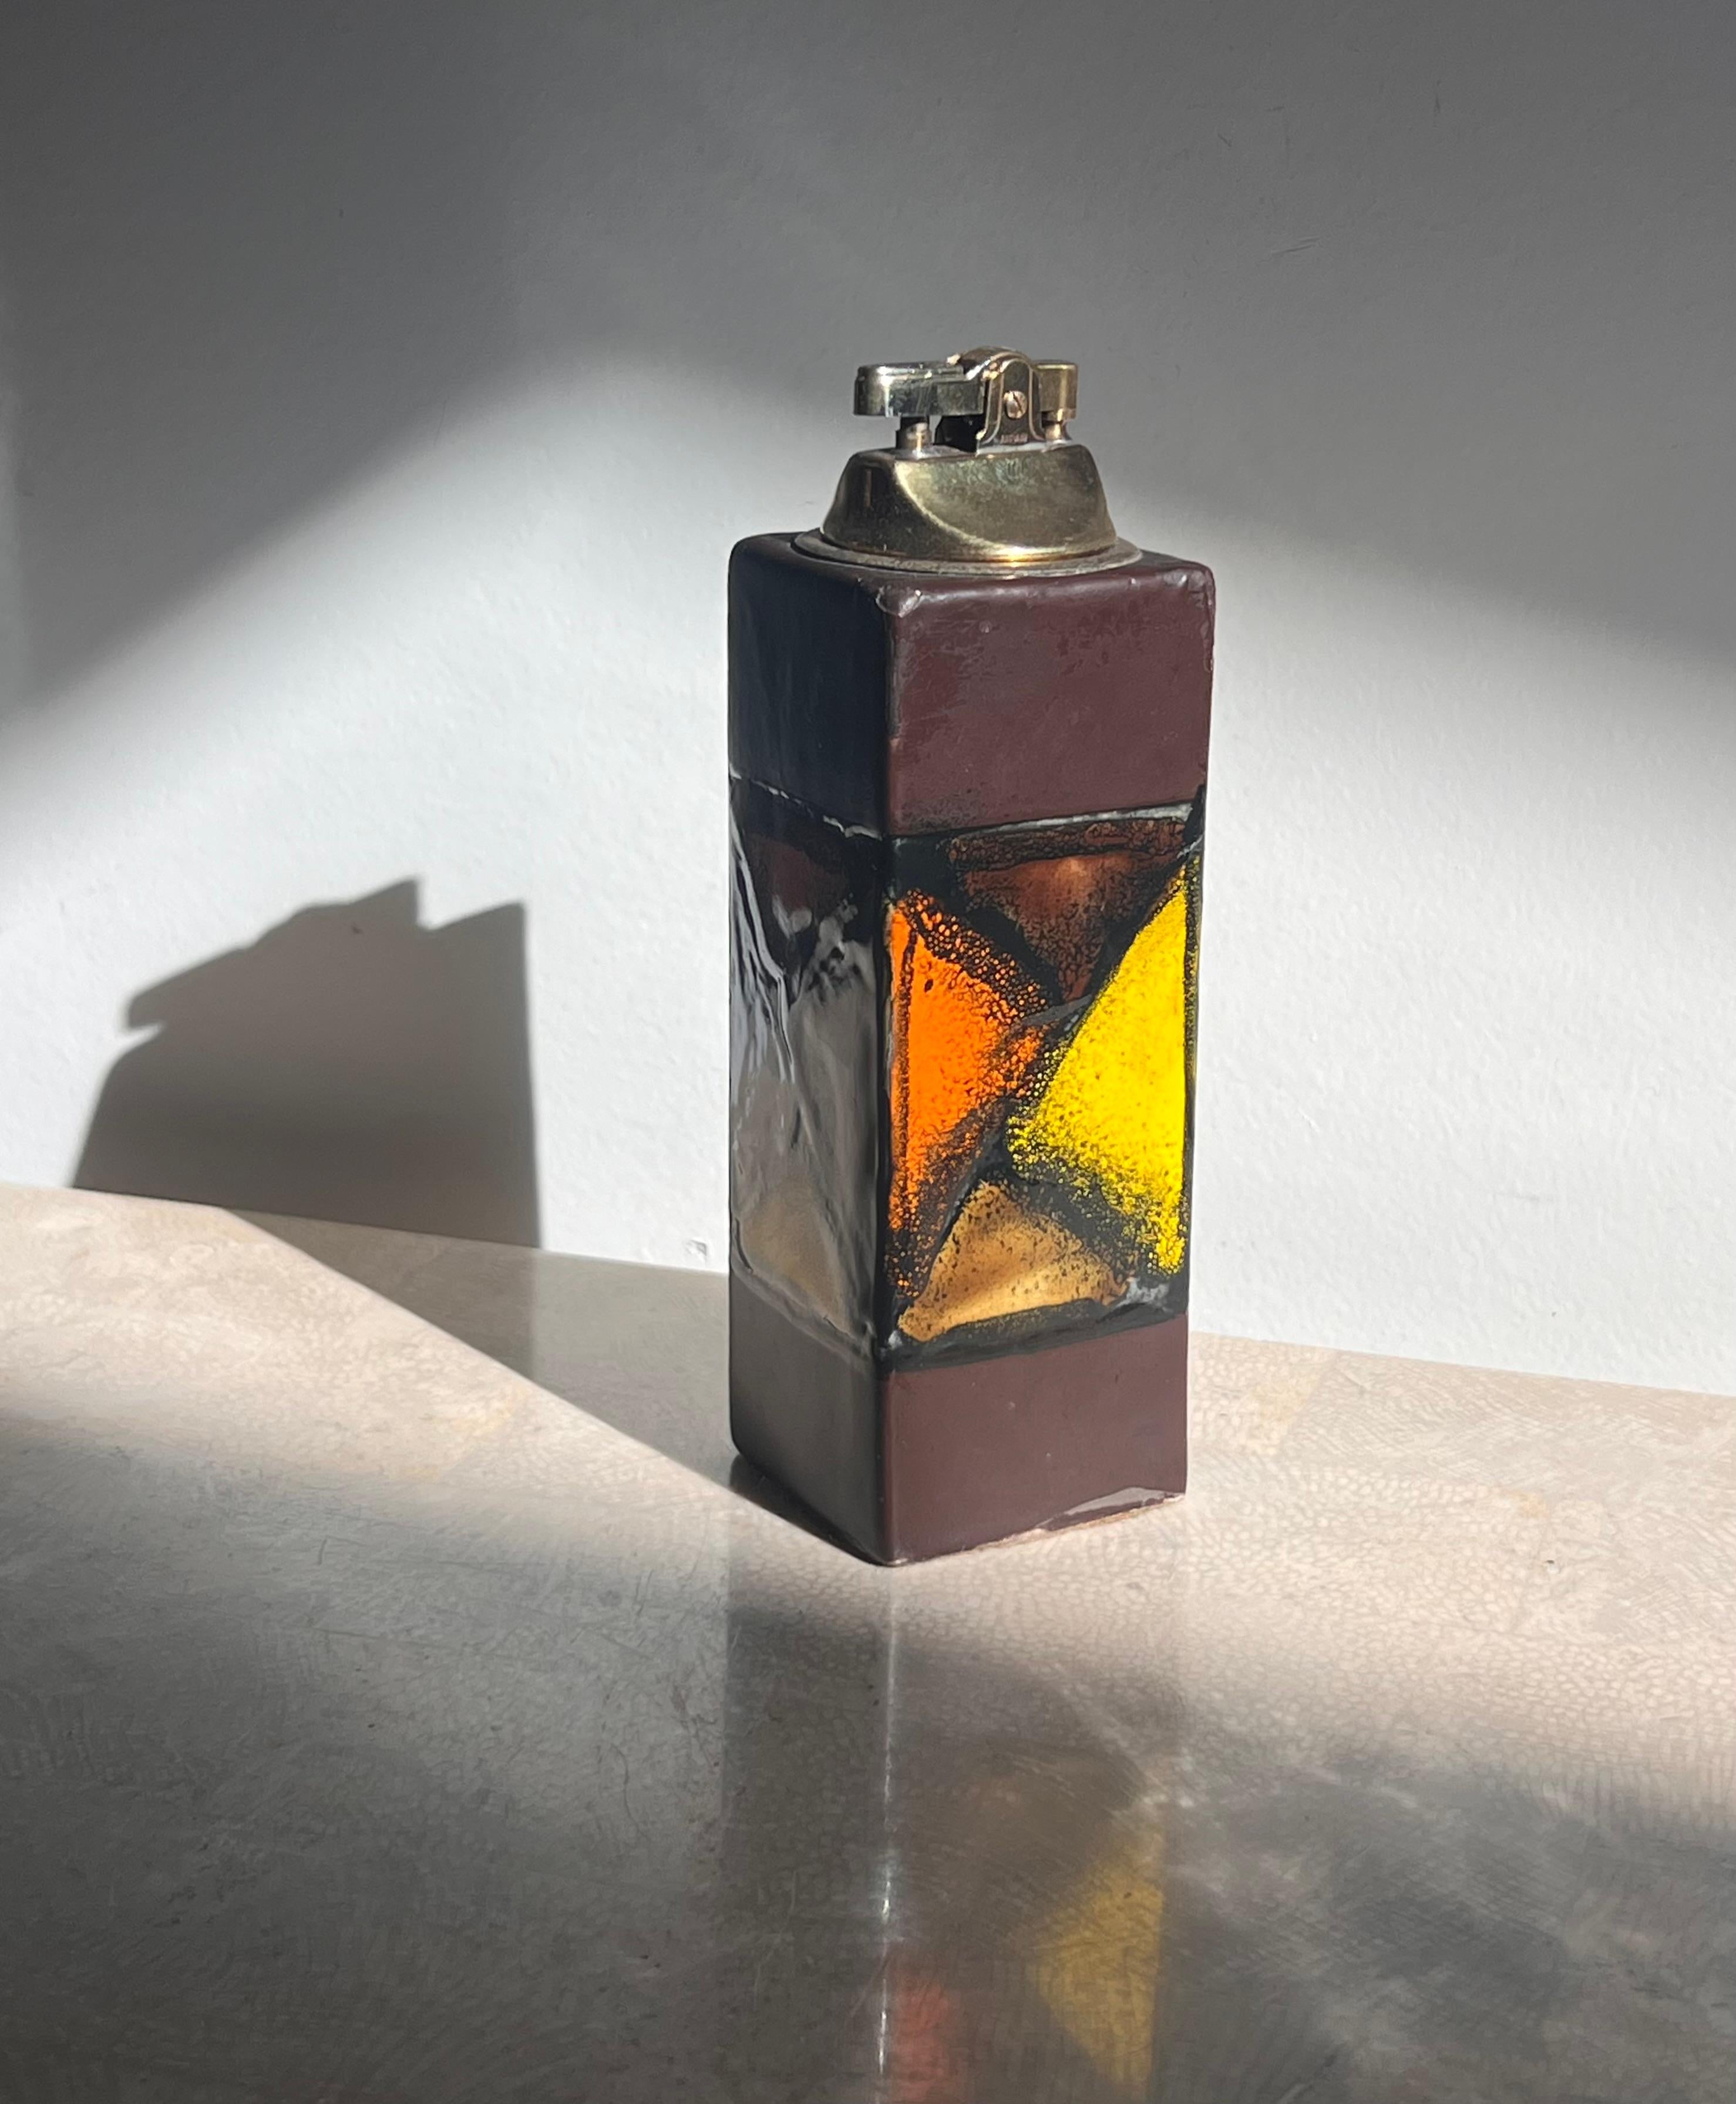 A mid century modern ceramic lighter by Aldo Londi for Bitossi, Italy 1960s. Tones of espresso, marigold, and mandarin. Working condition unchecked; I did not attempt to refill the lighter fluid as I’m unable to ship anything containing it. Pick up